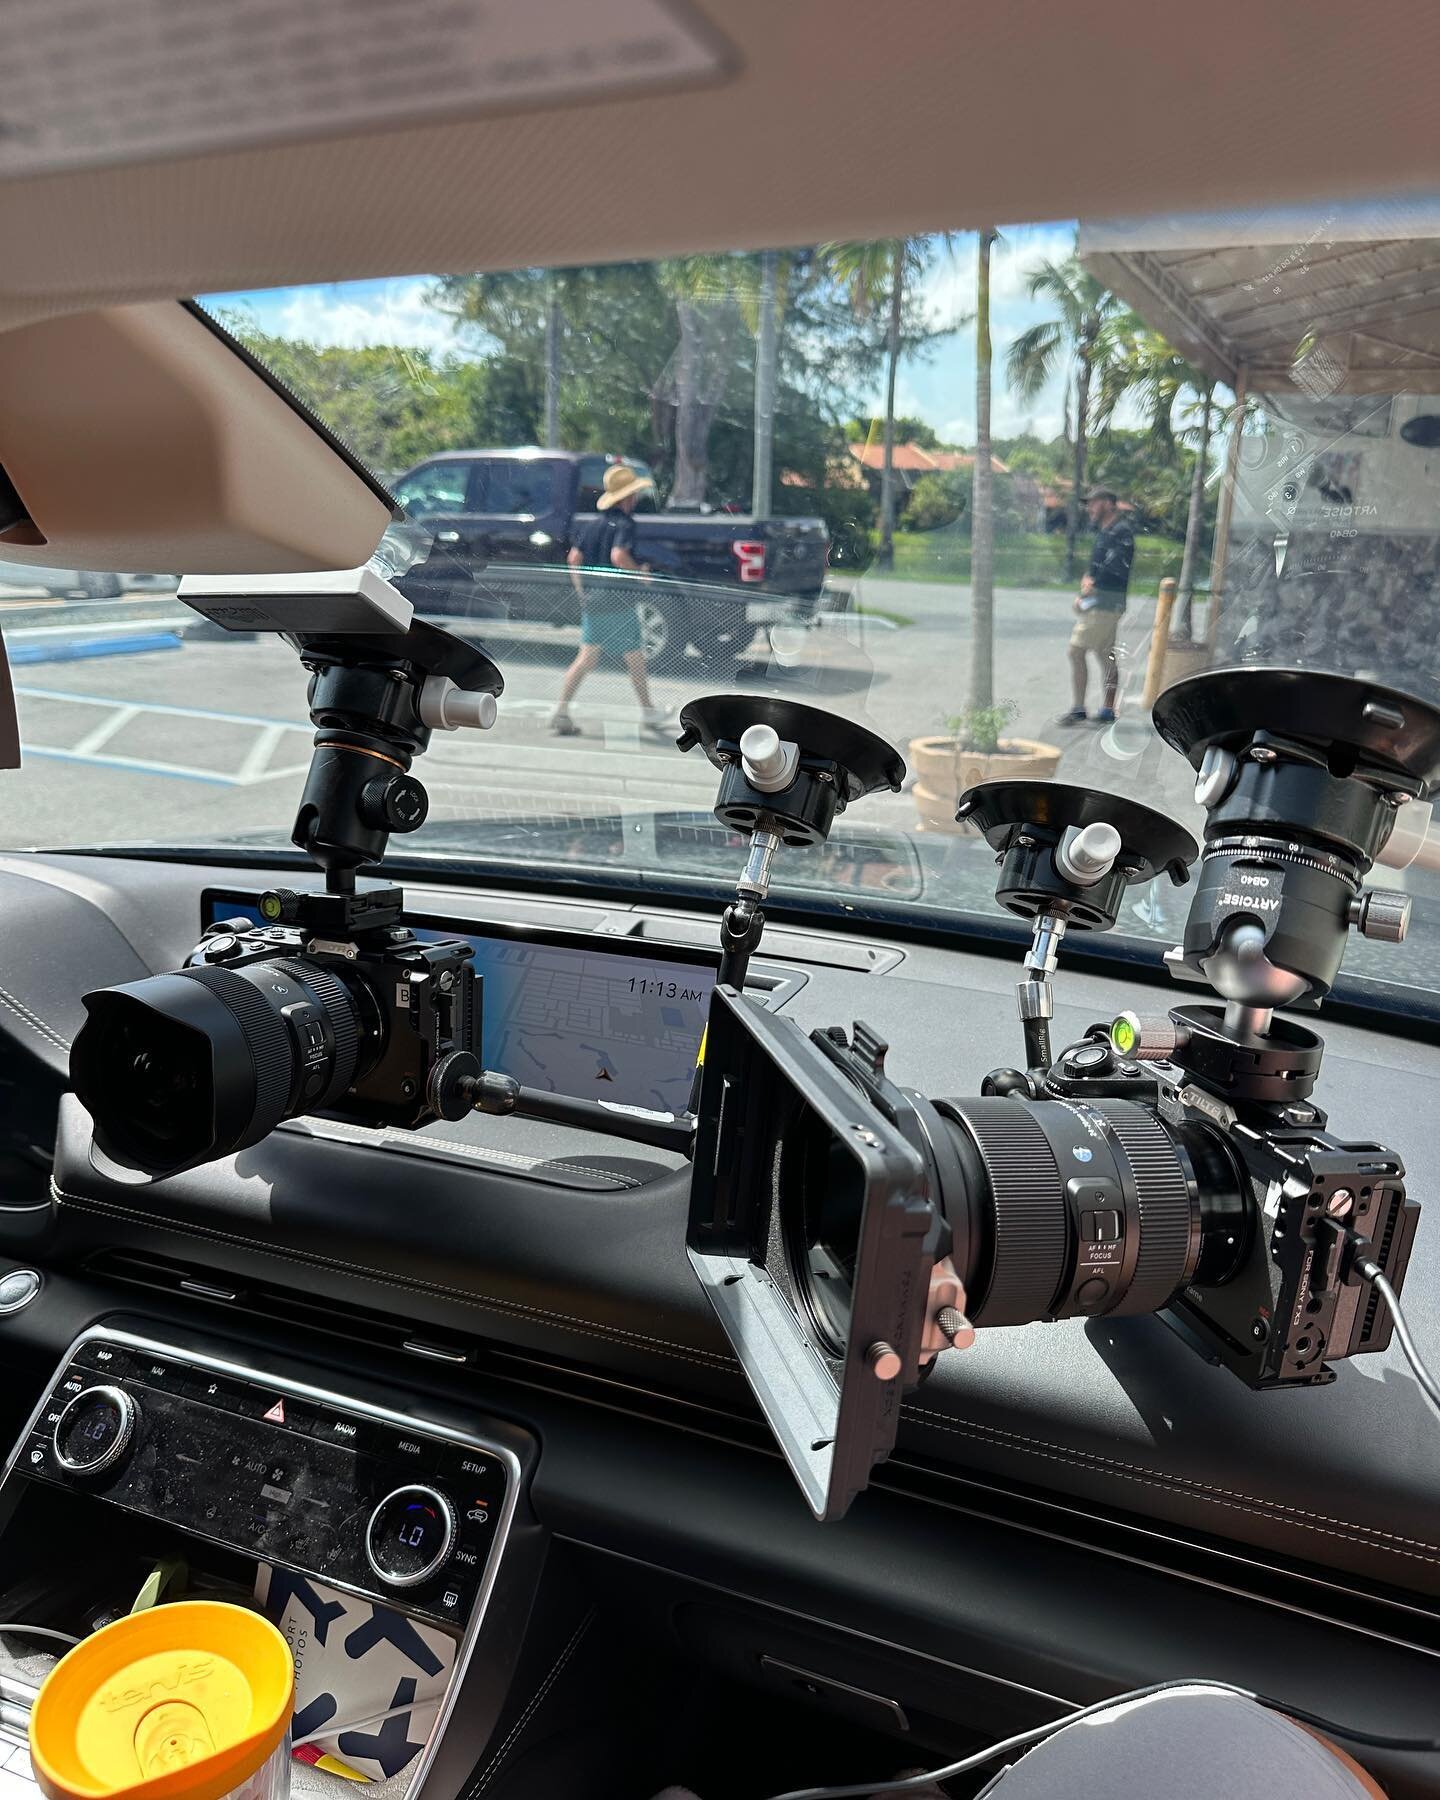 Today we rigged out 2 Sony FX3&rsquo;s in the interior of a car for a moving interview, I found these suction mounts on @amazon and they were perfect for the setup, we doubled them up on each FX3 for safety and stability and the shots came out beauti